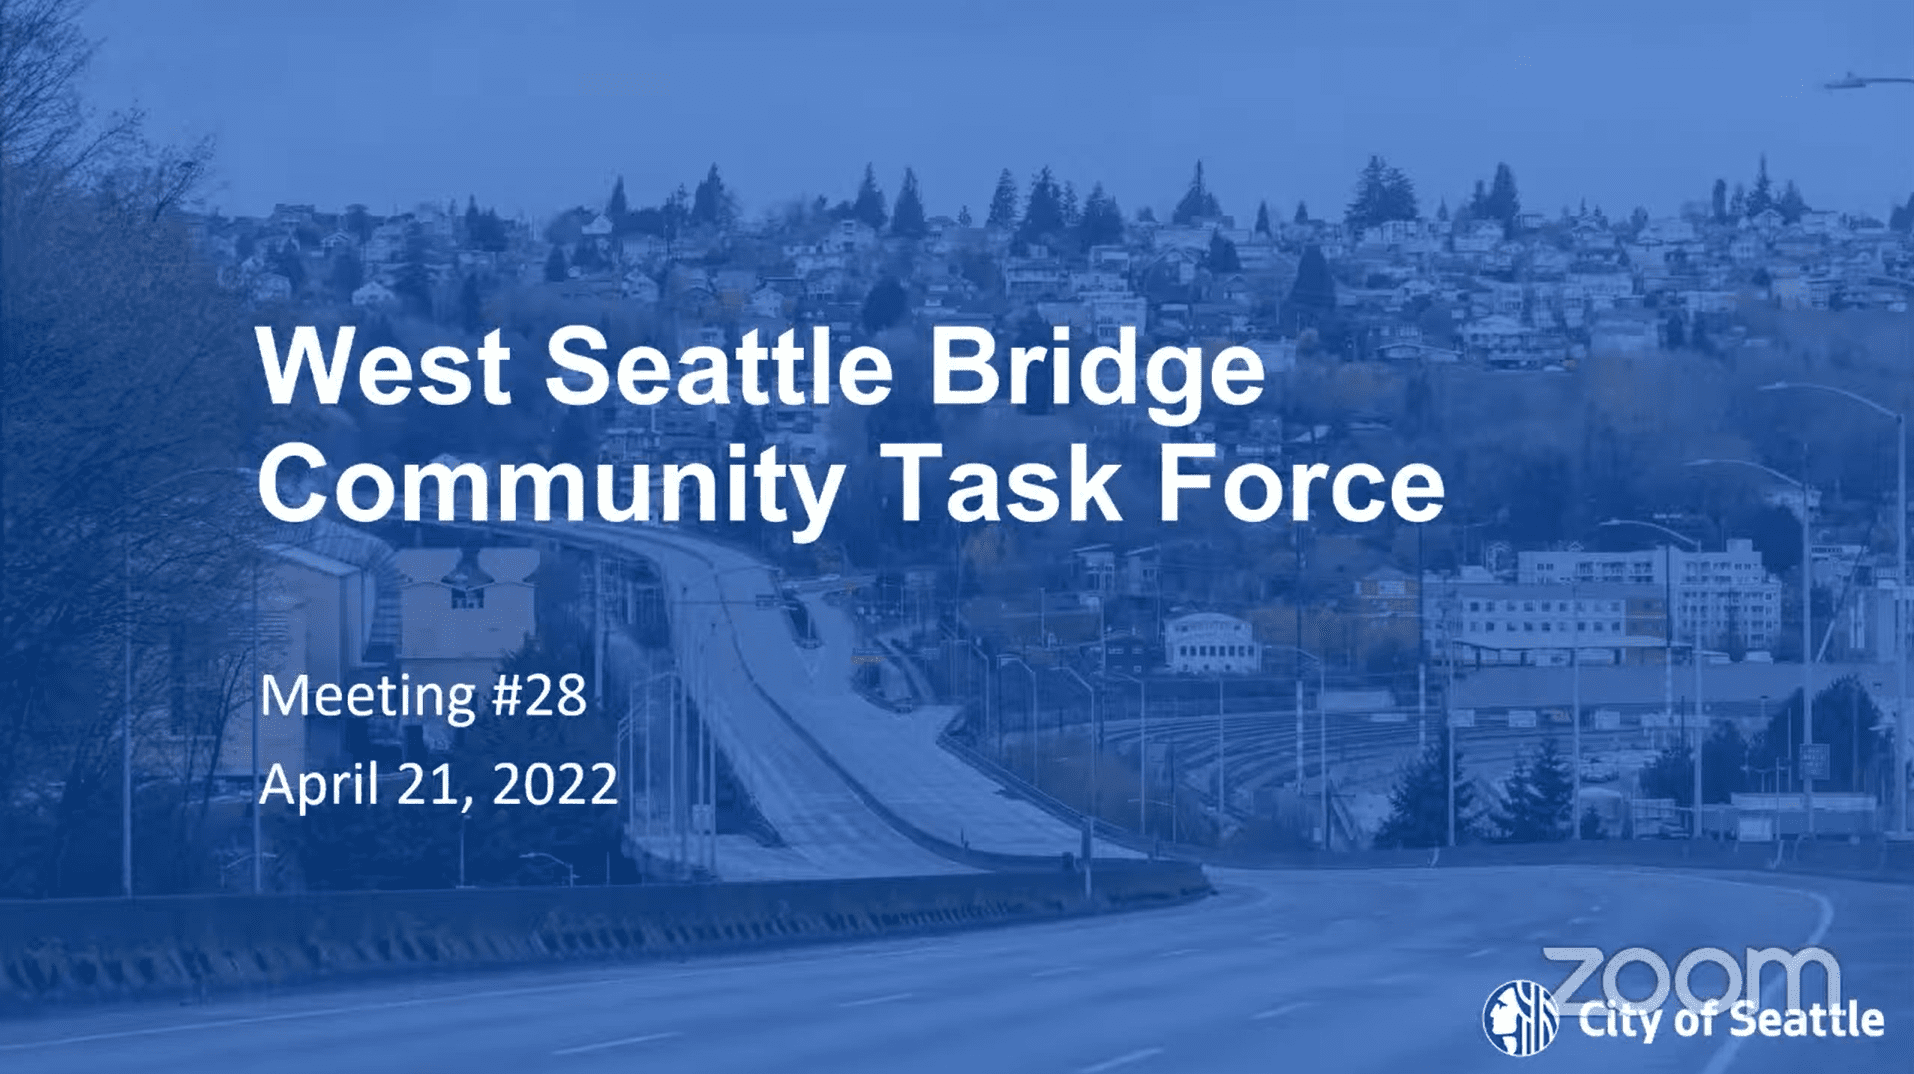 Screenshot of the cover slide of the 28th West Seattle Bridge Community Task Force Meeting, held on April 21, 2022.